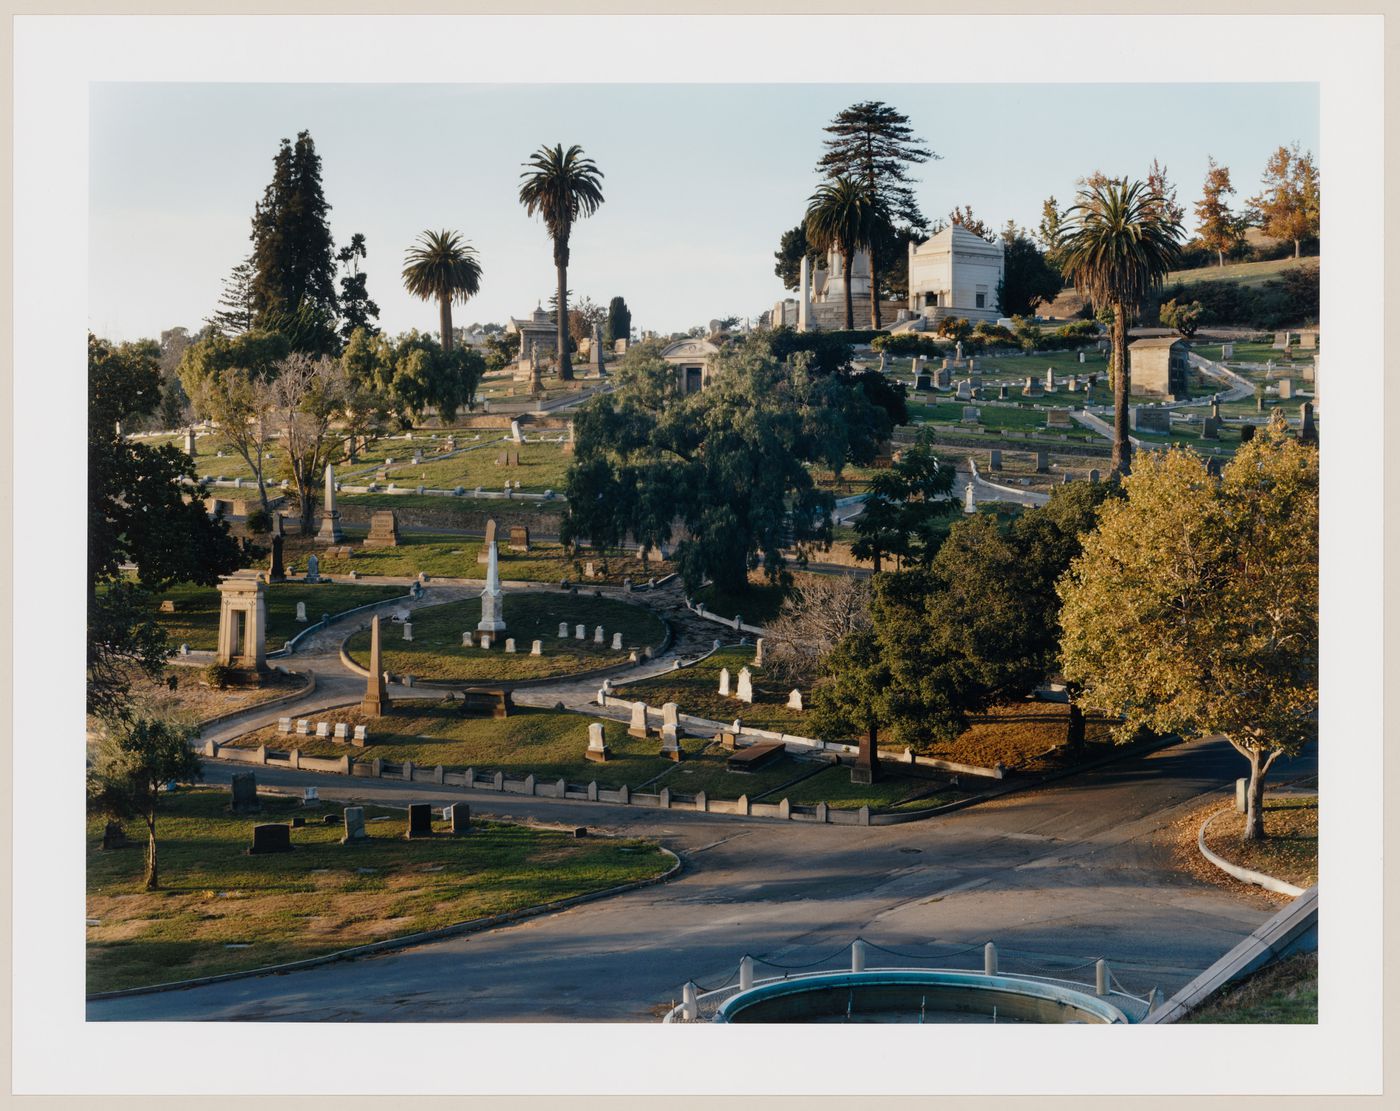 Viewing Olmsted: Overview, late afternoon, Mountain View Cemetery, Oakland, California